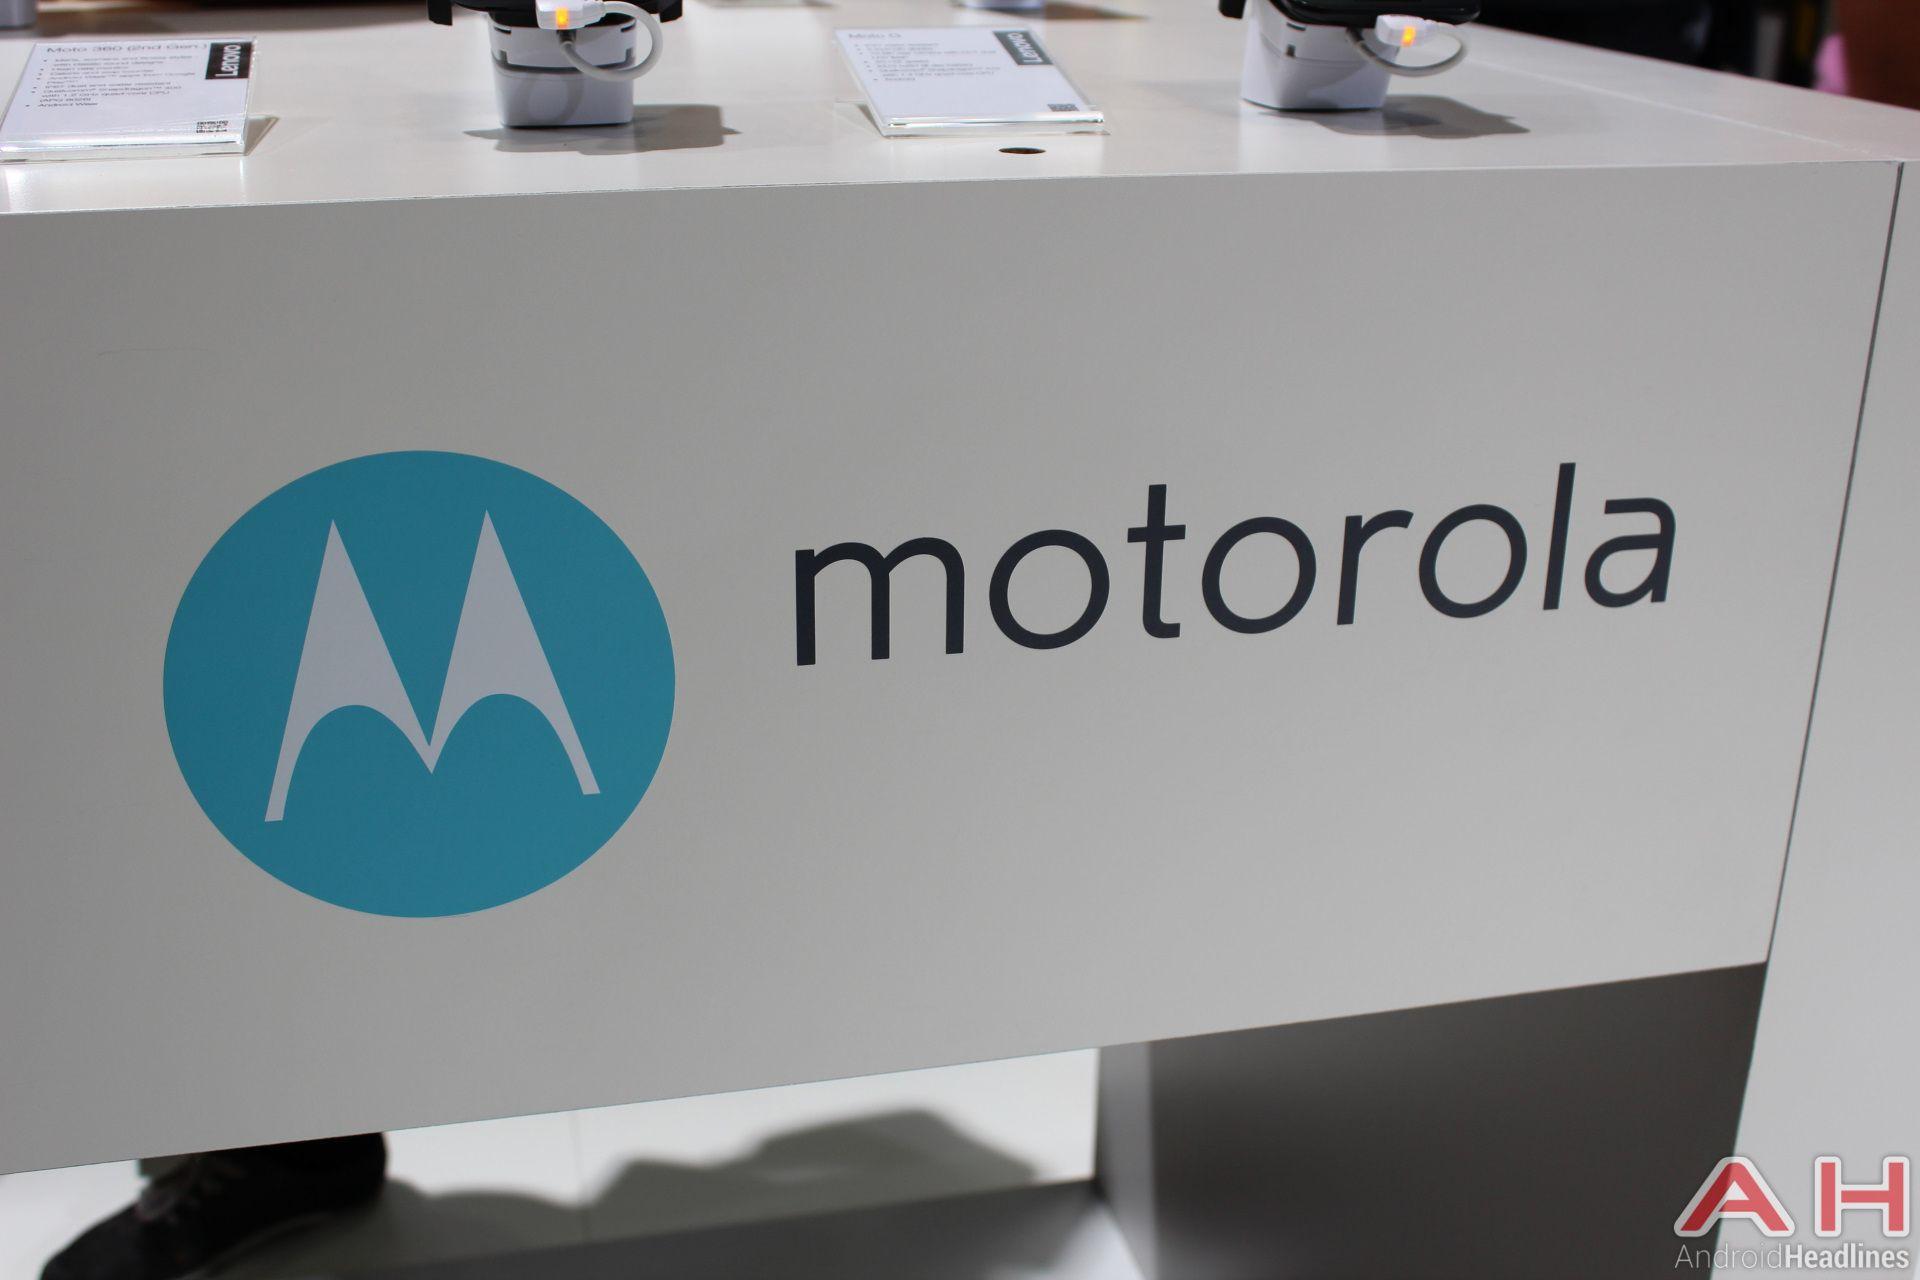 Motorola Home Logo - Moto G4 Plus Leaks Out, Showing Physical Home Button | Android Headlines